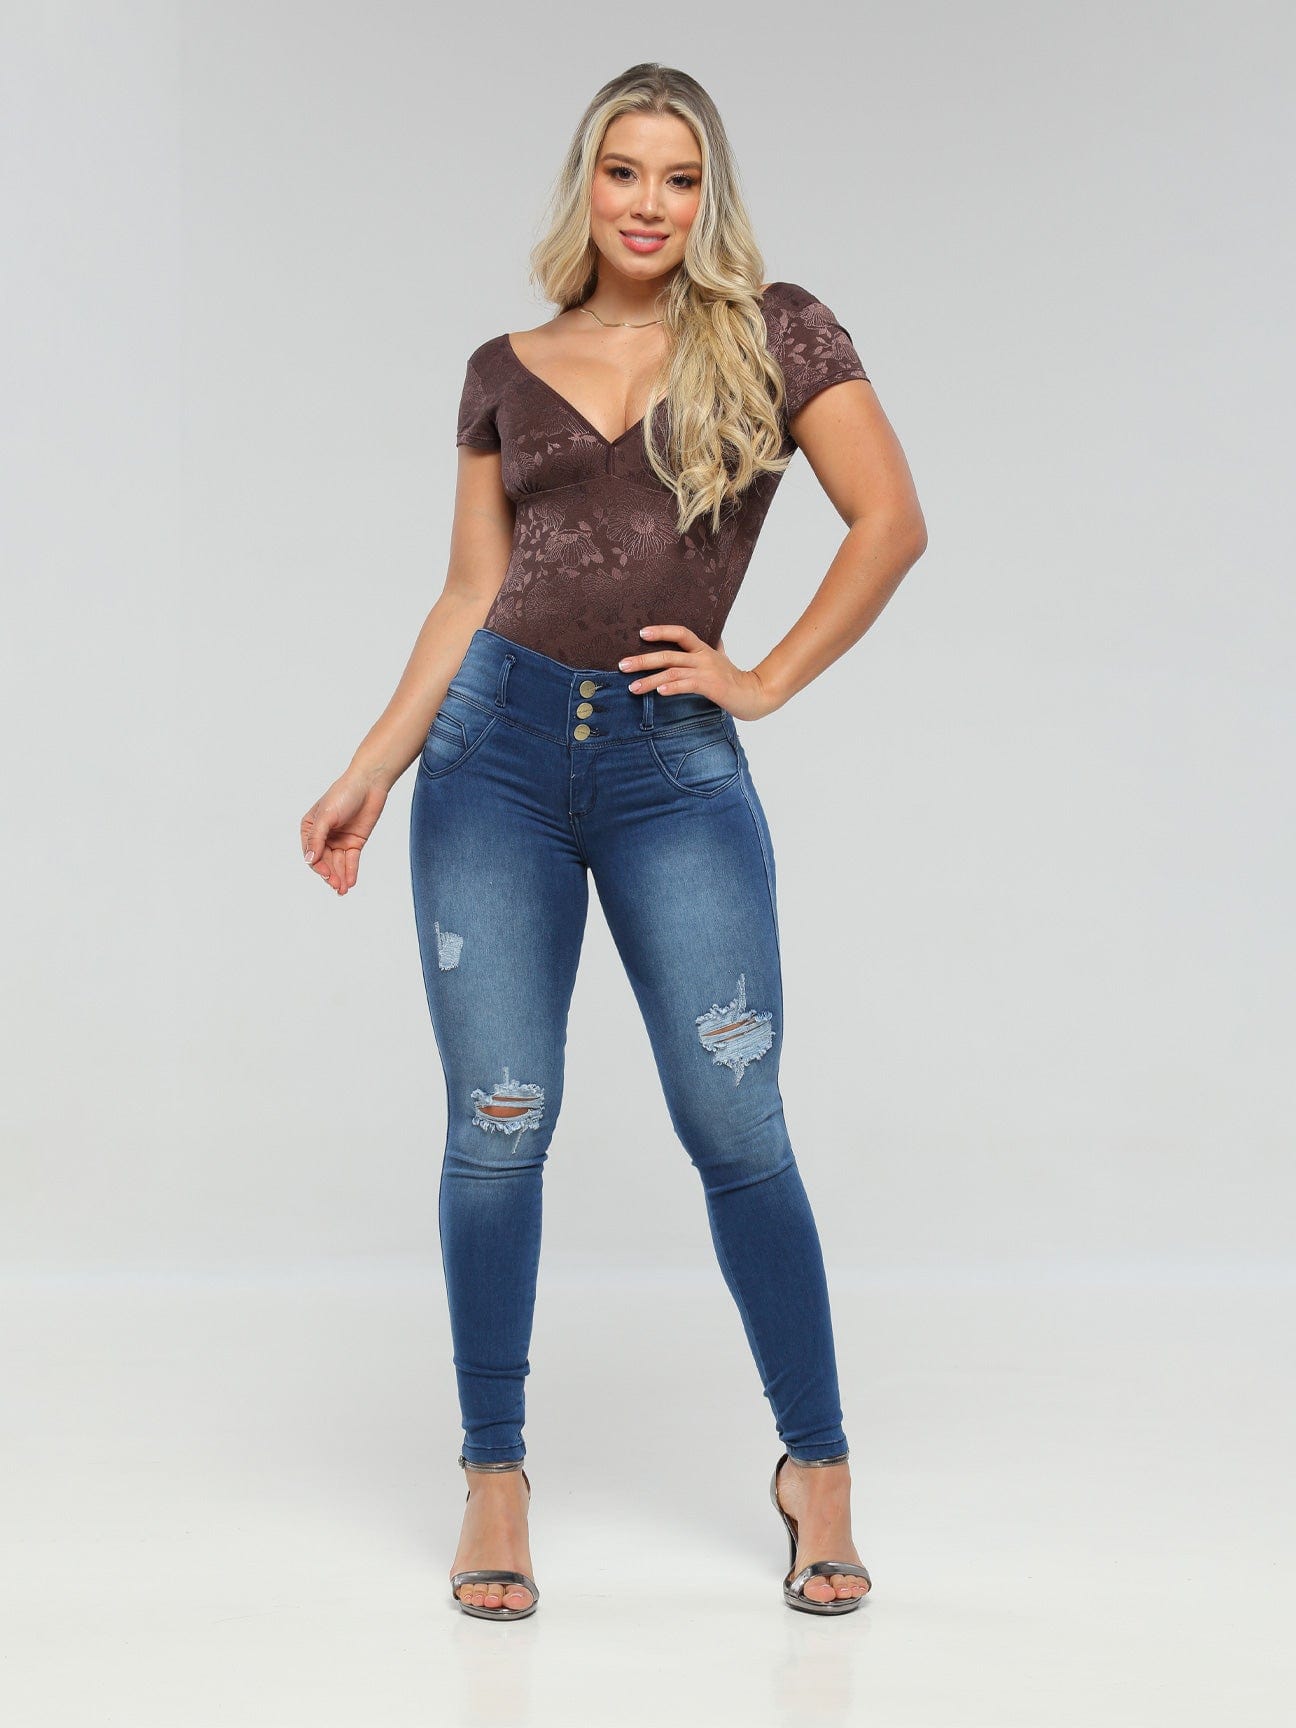 Stylish & Hot colombian butt lift jeans wholesale at Affordable Prices 